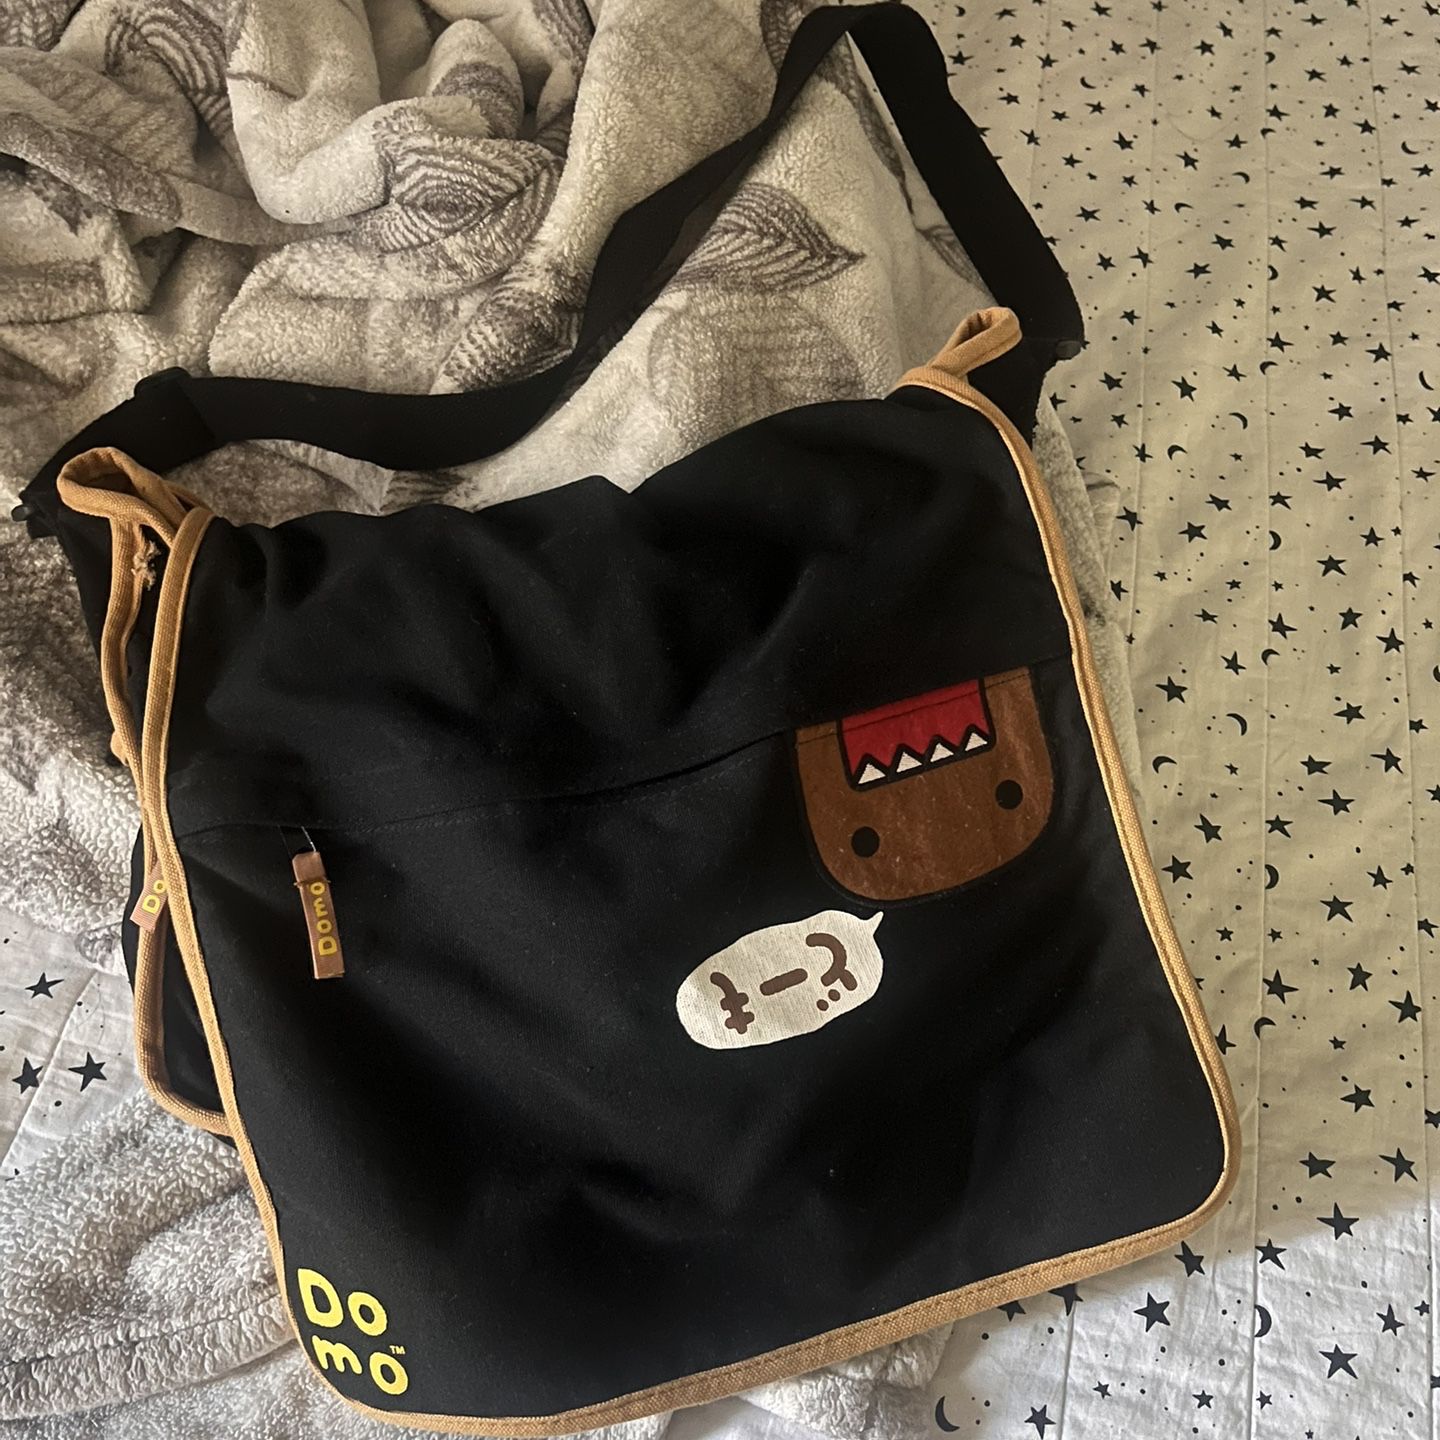 Hello kitty Messenger Bag for Sale in Arlington, TX - OfferUp